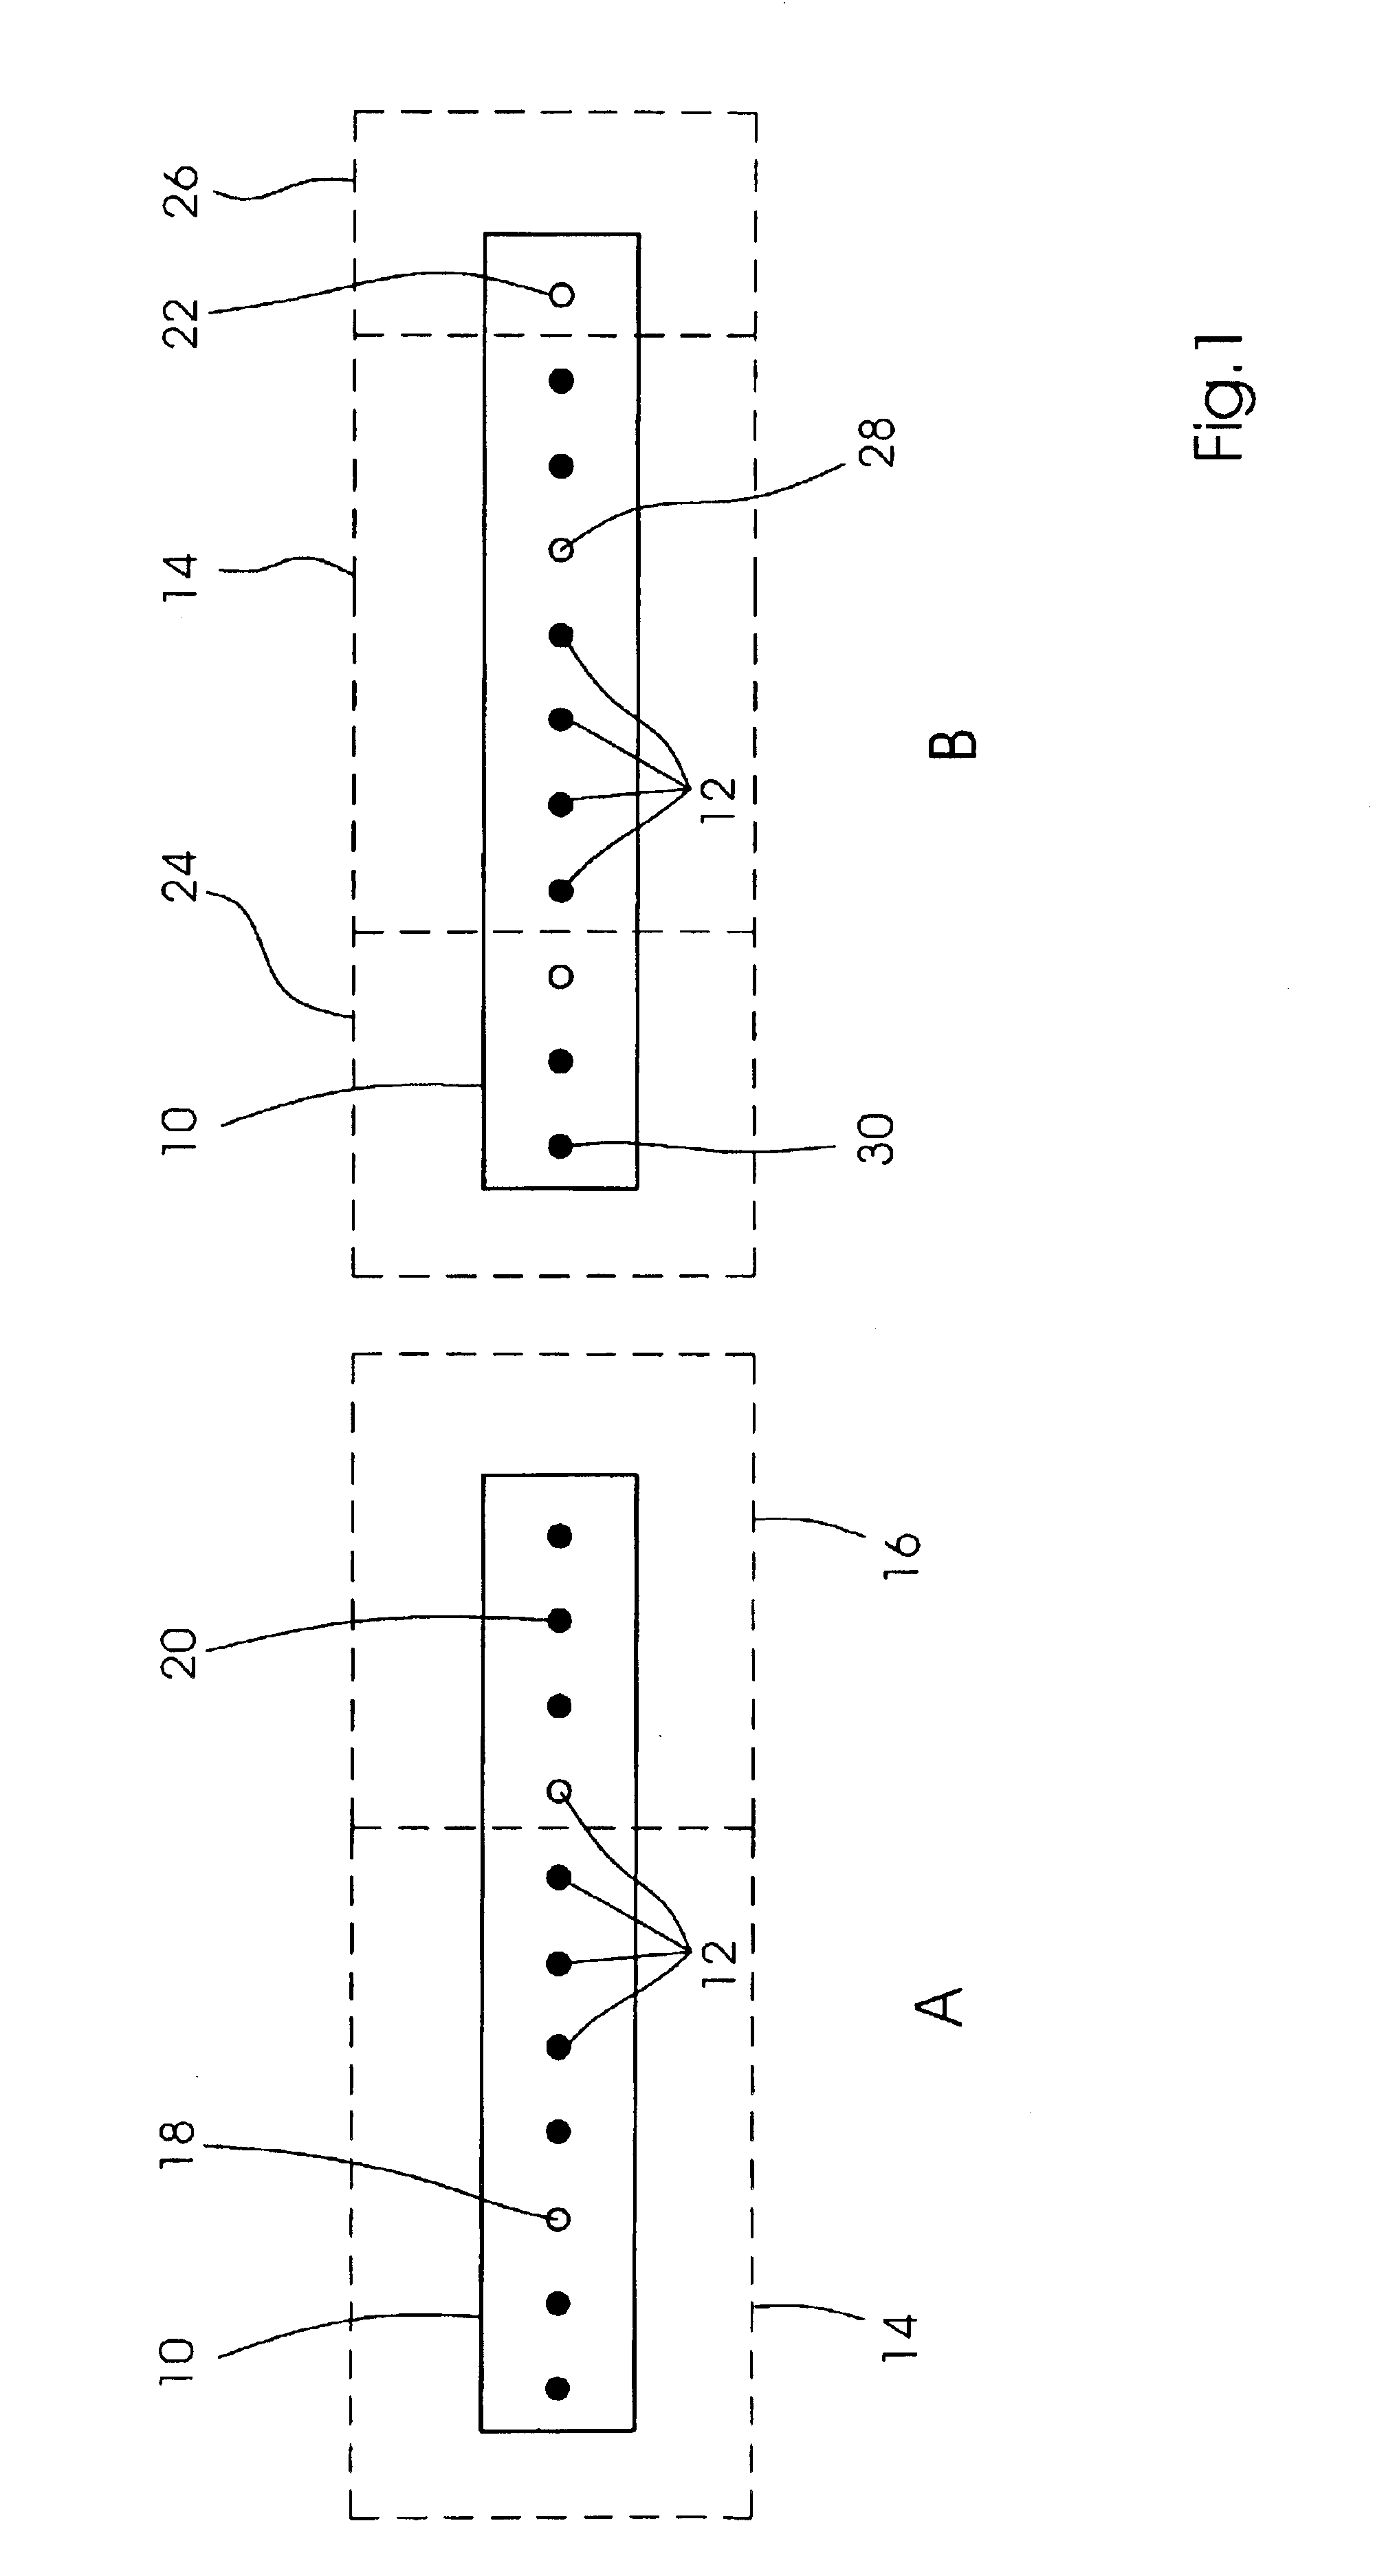 Imaging method for printing forms